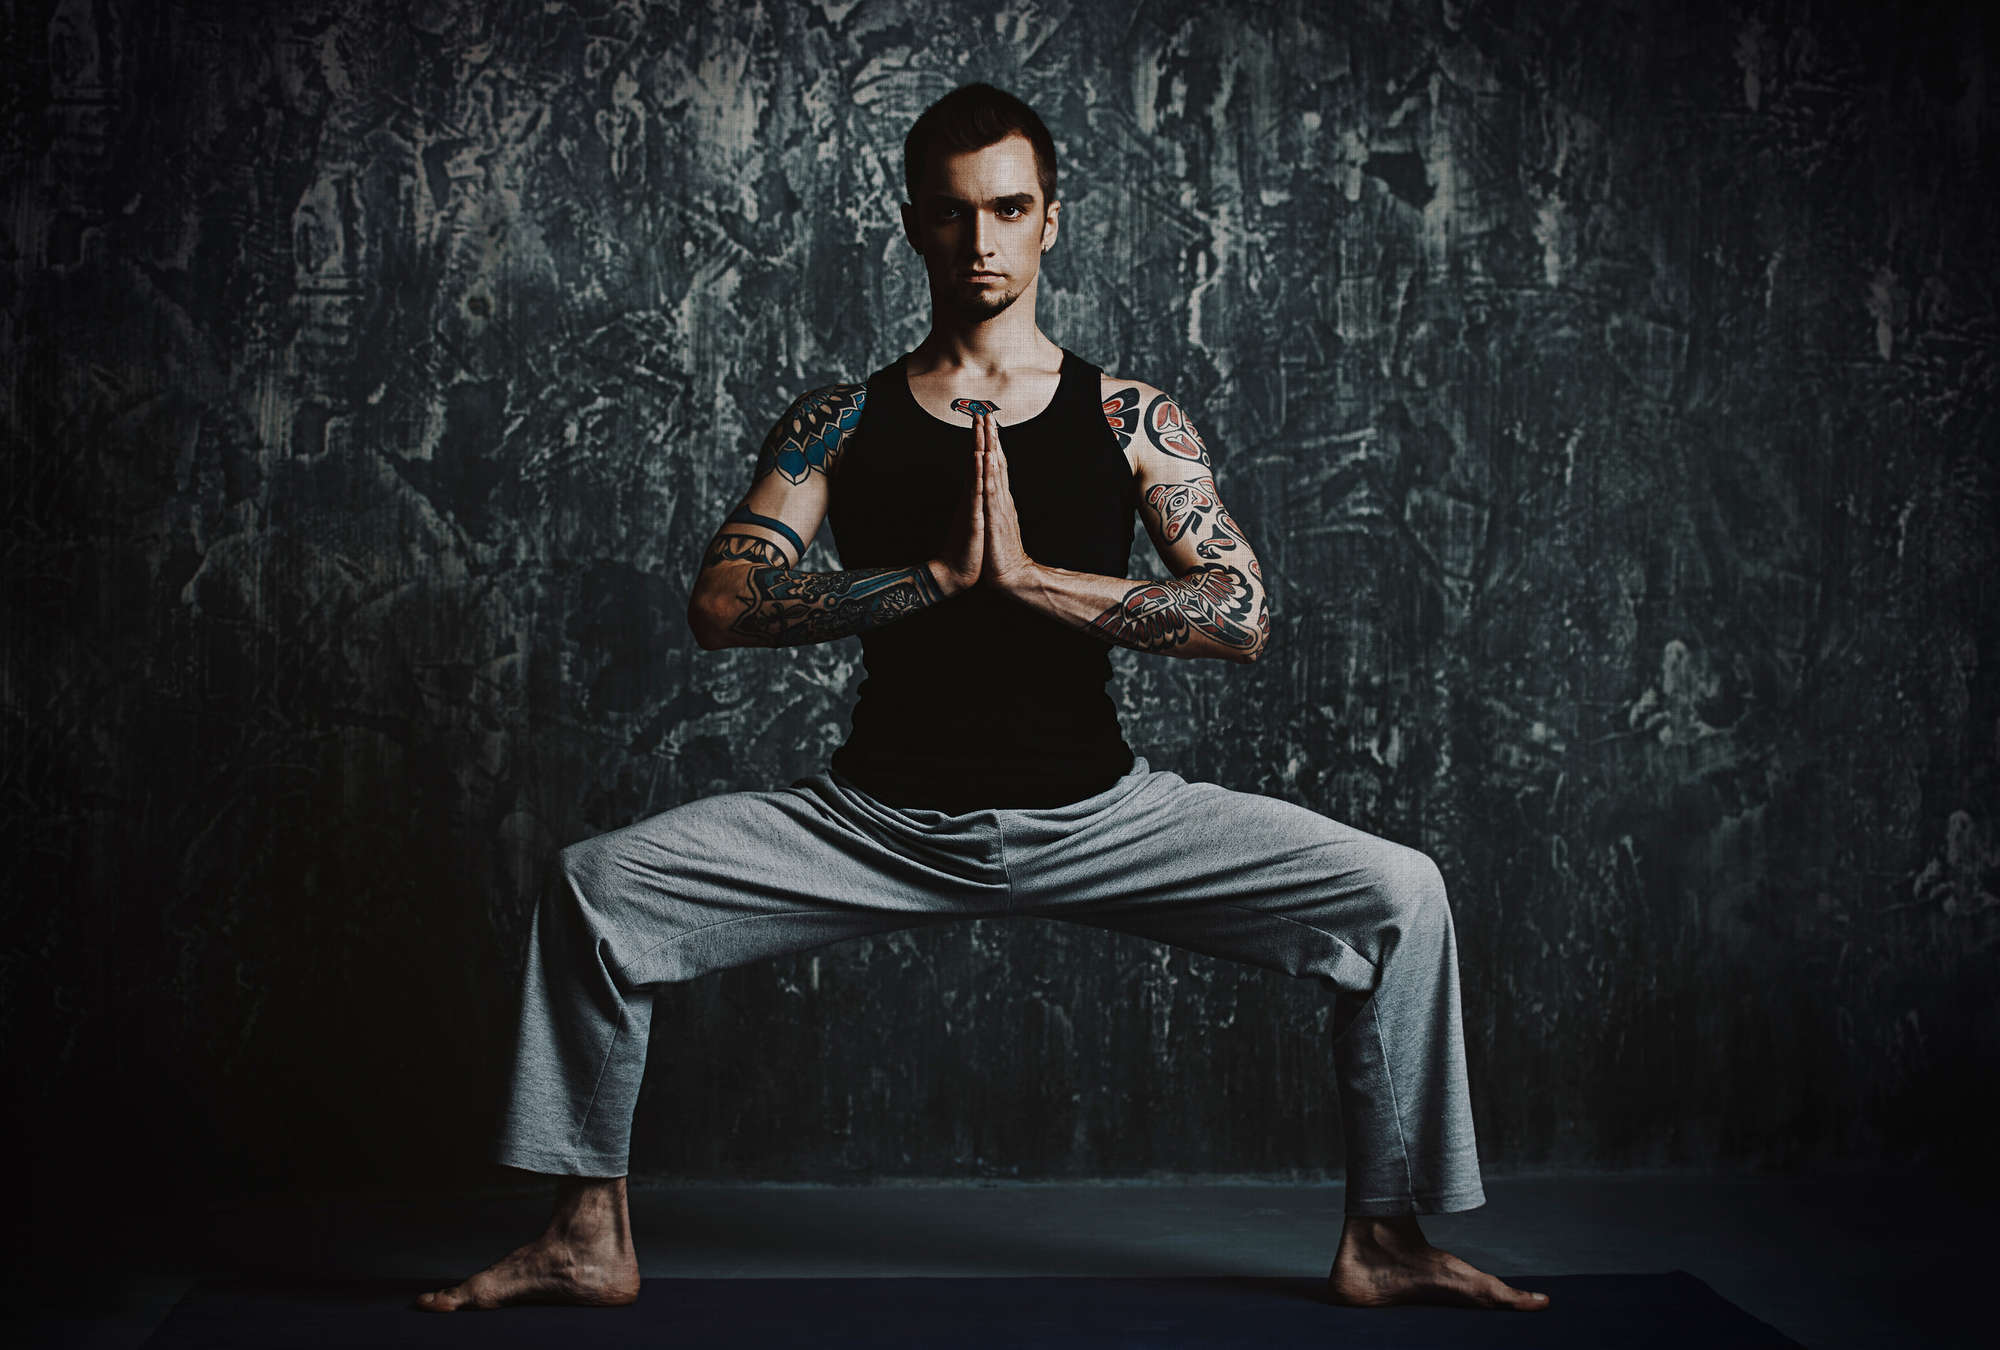             Chandra 1 - Man doing yoga pose as photo wallpaper in natural linen structure - Blue, Black | Structure Non-woven
        